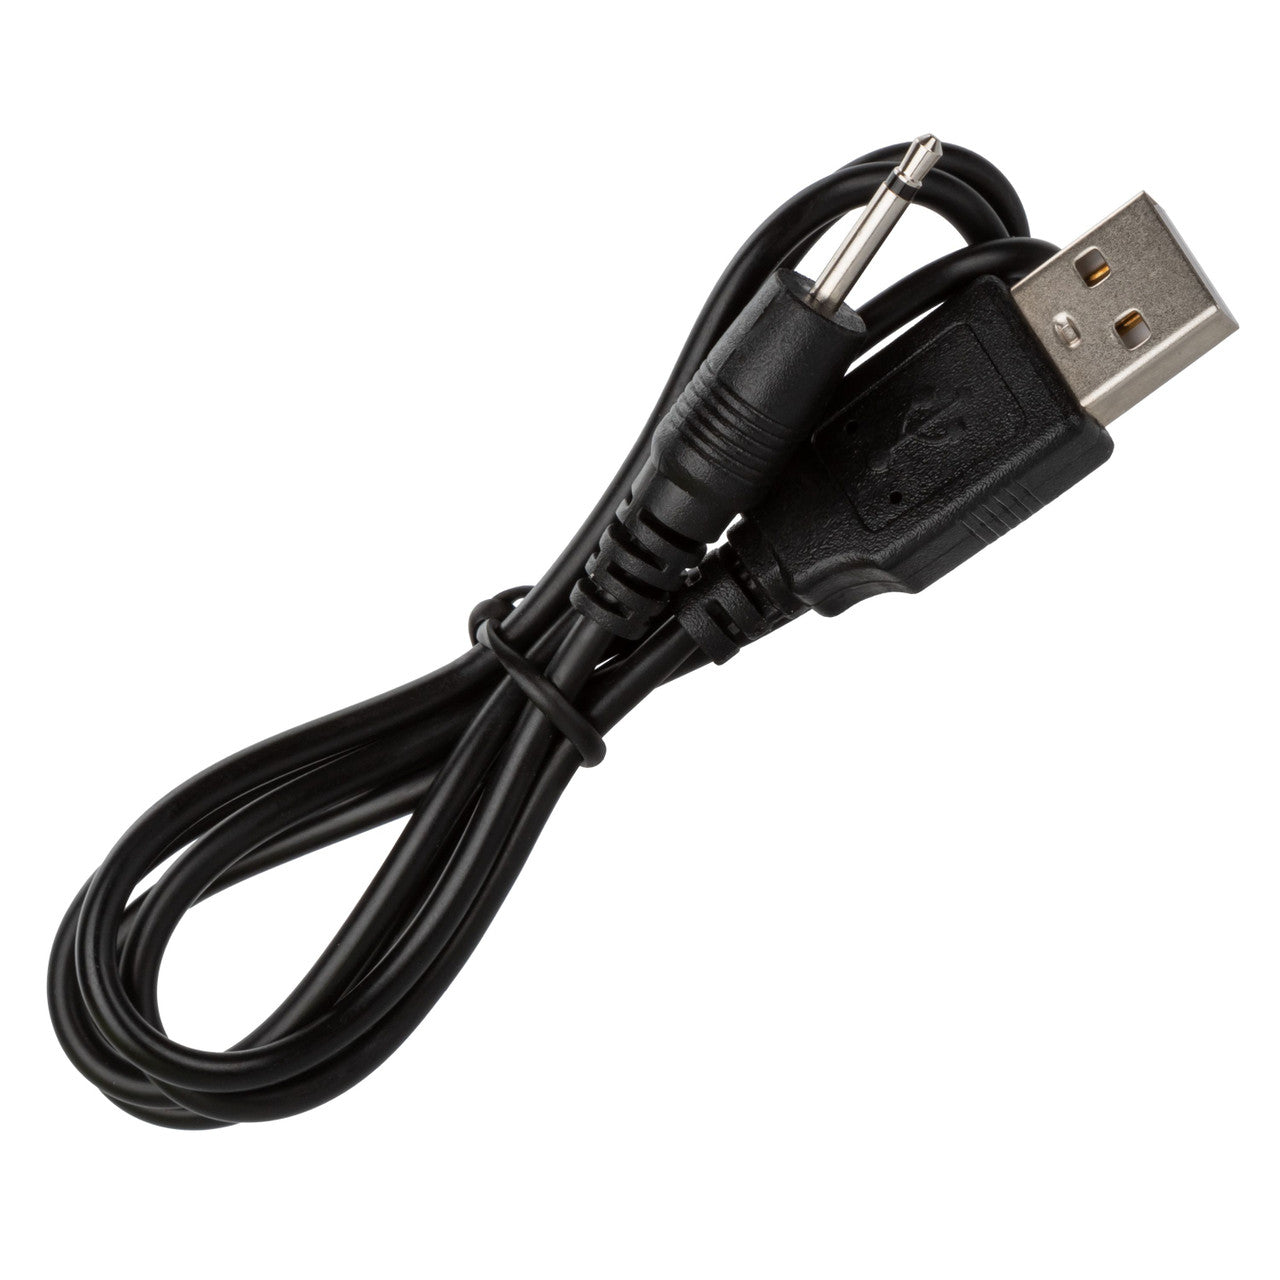 Generic USB-prong charger